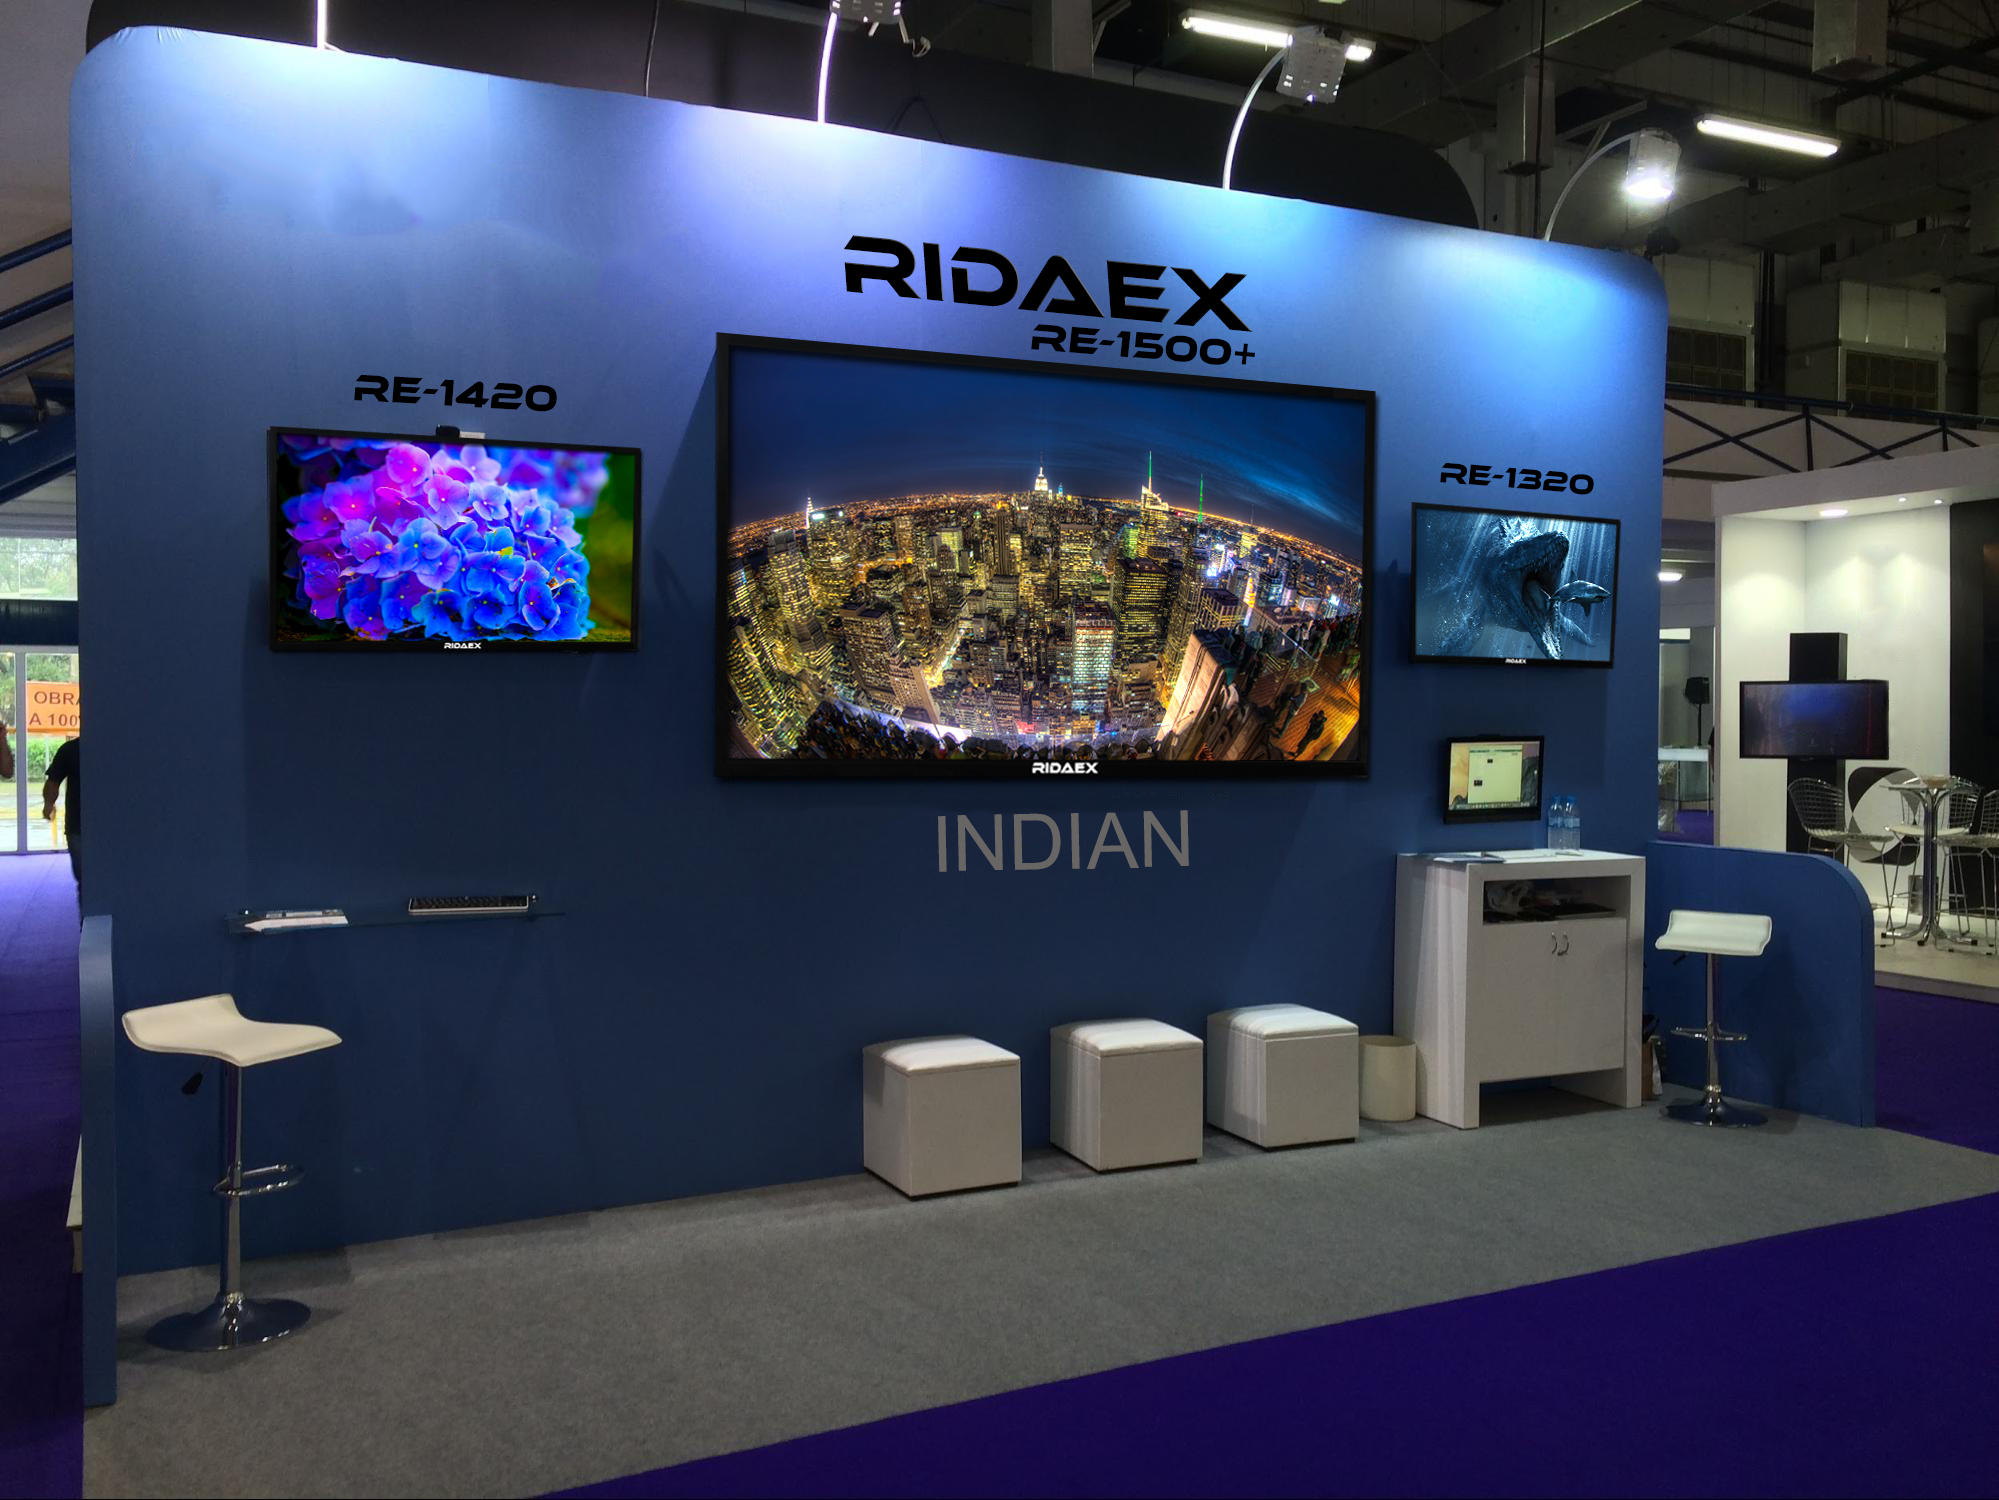 RIDAEX, The Indian player conquering the new gen smart TV market introduces RE PRO 2019 models 6